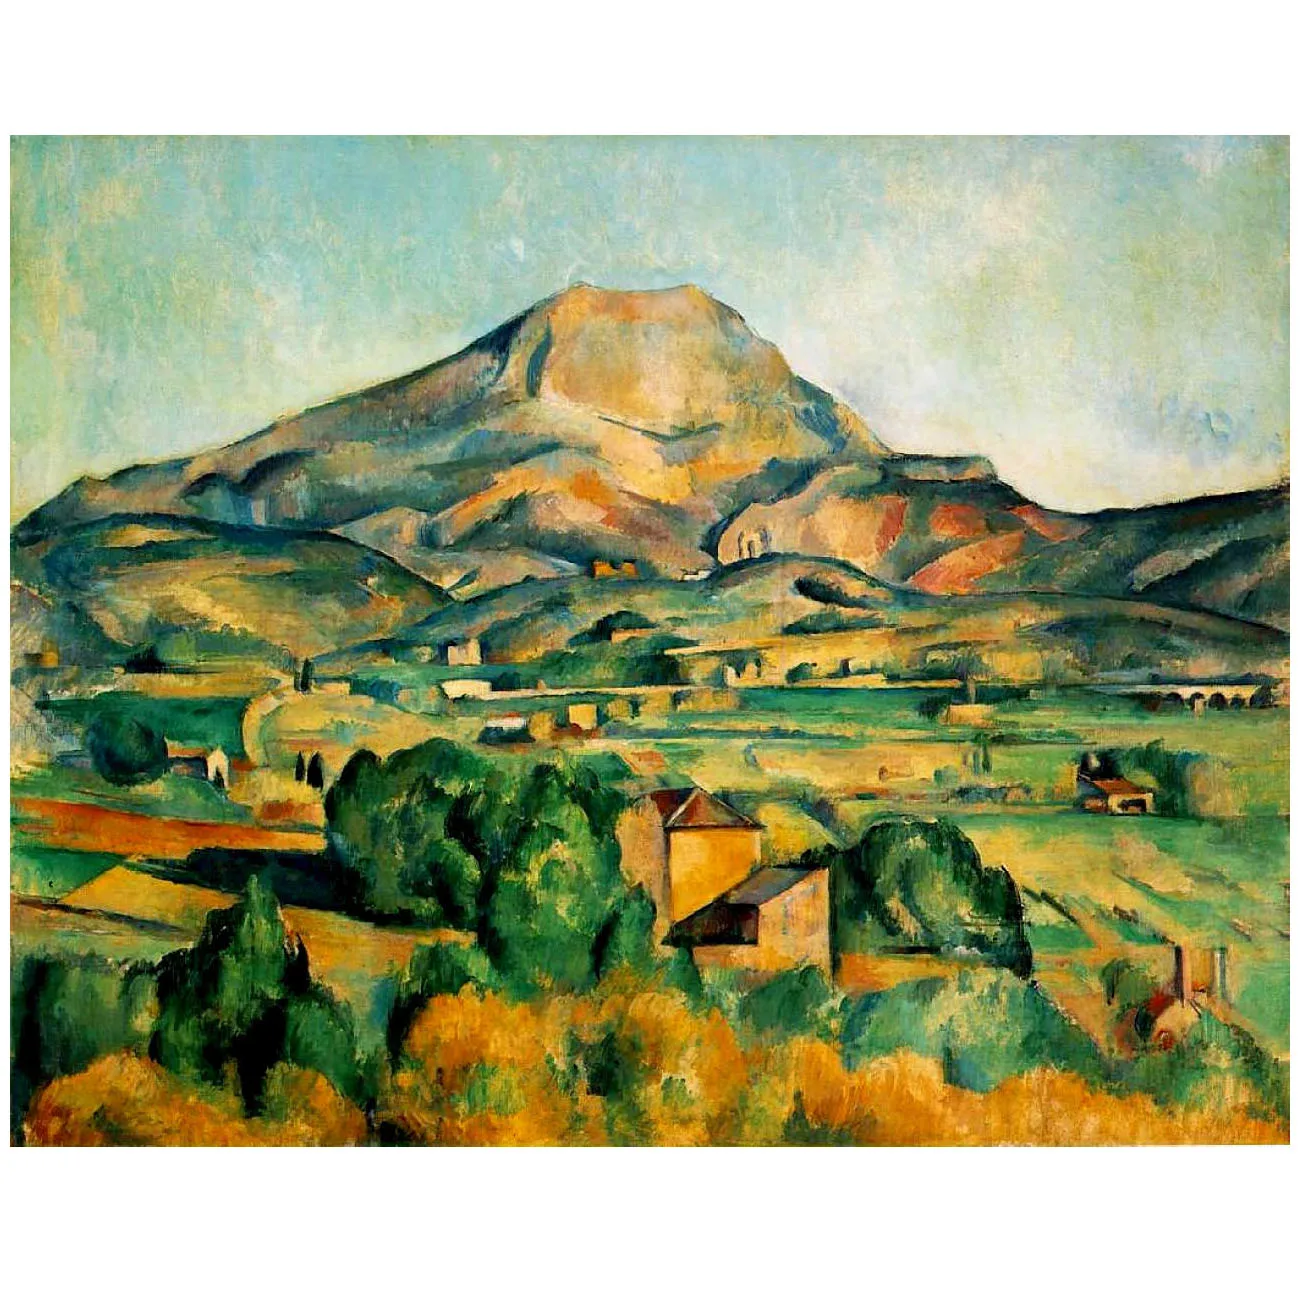 

Famous oil paintings,Hand painted Oil Painting Reproduction on linen canvas,Mont Sainte-Victoire BY paul Cezanne,Free Shipping